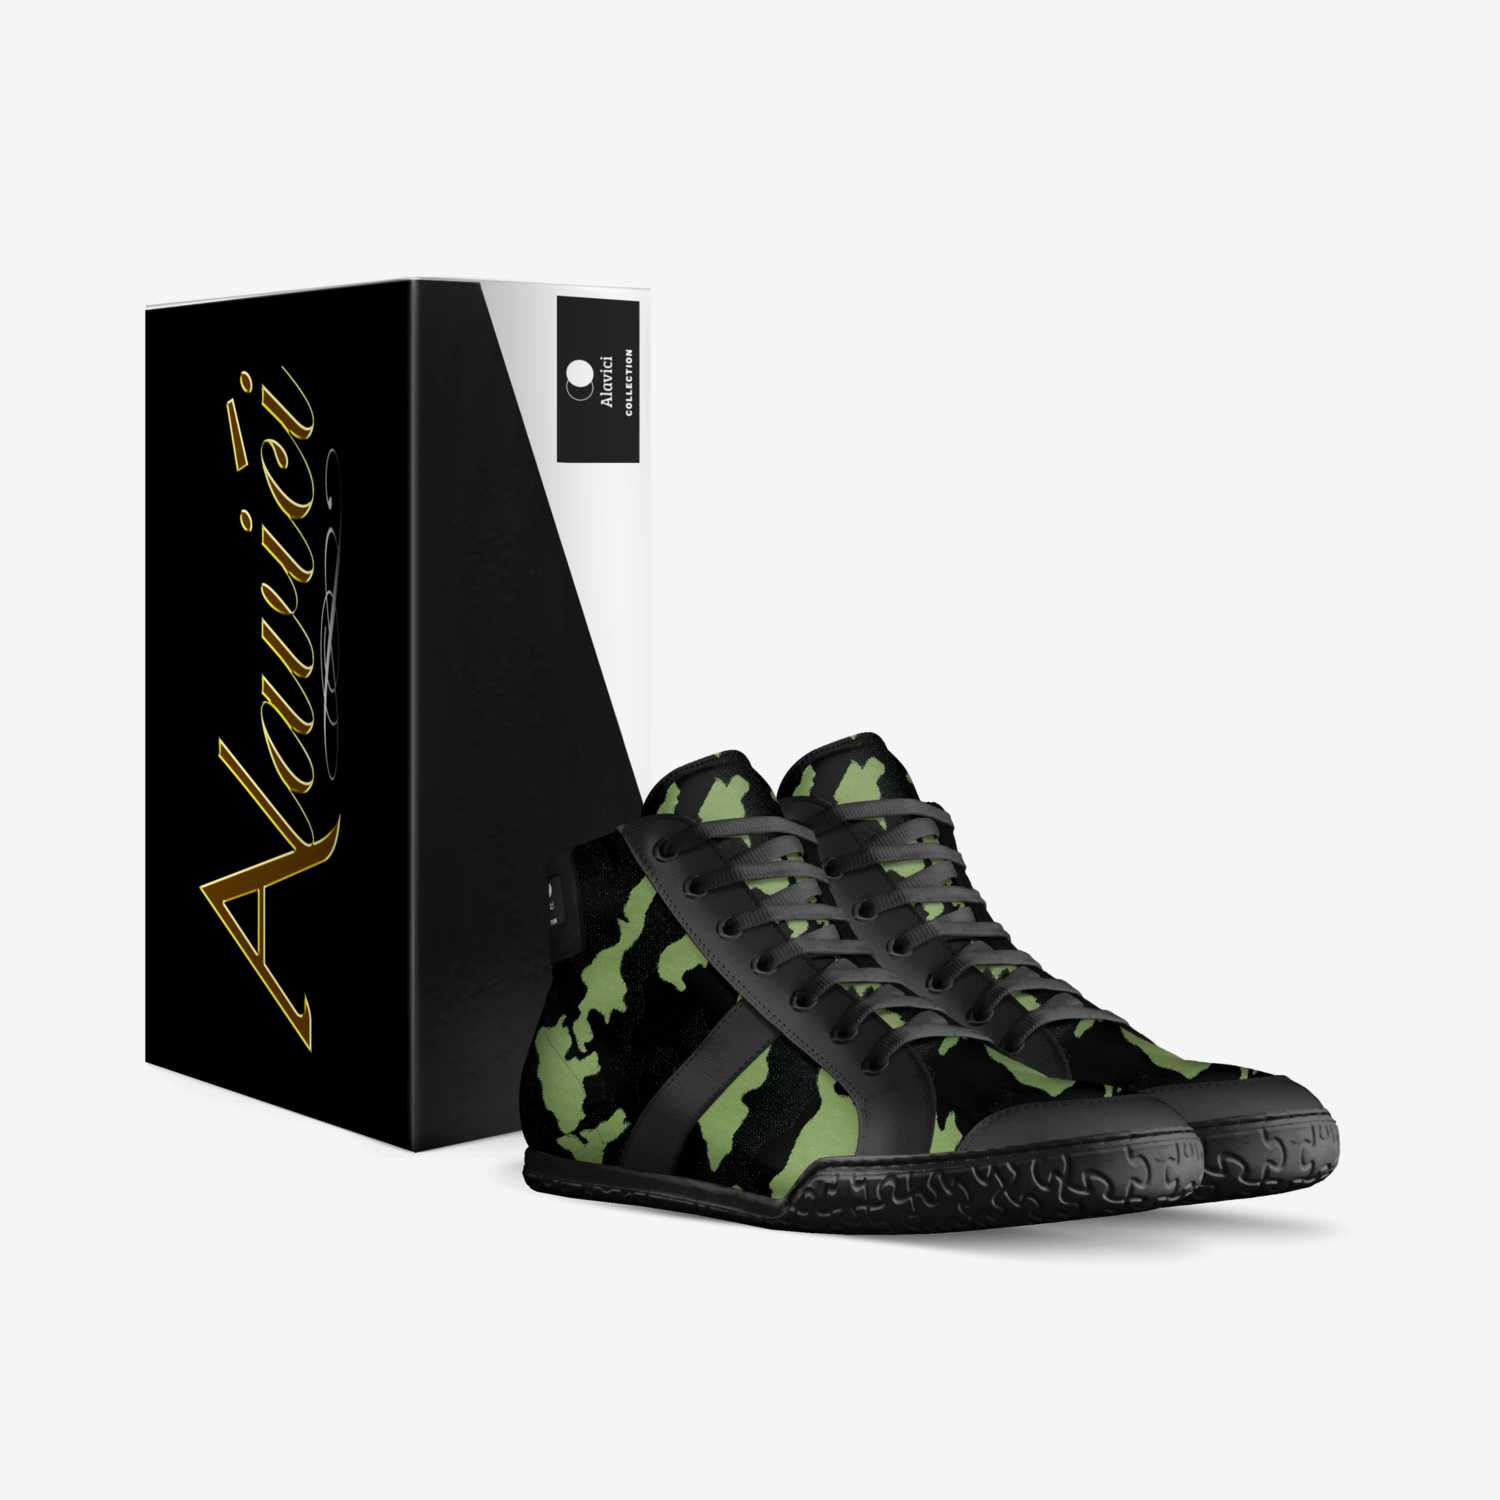 Alavici custom made in Italy shoes by Maurice Glover | Box view